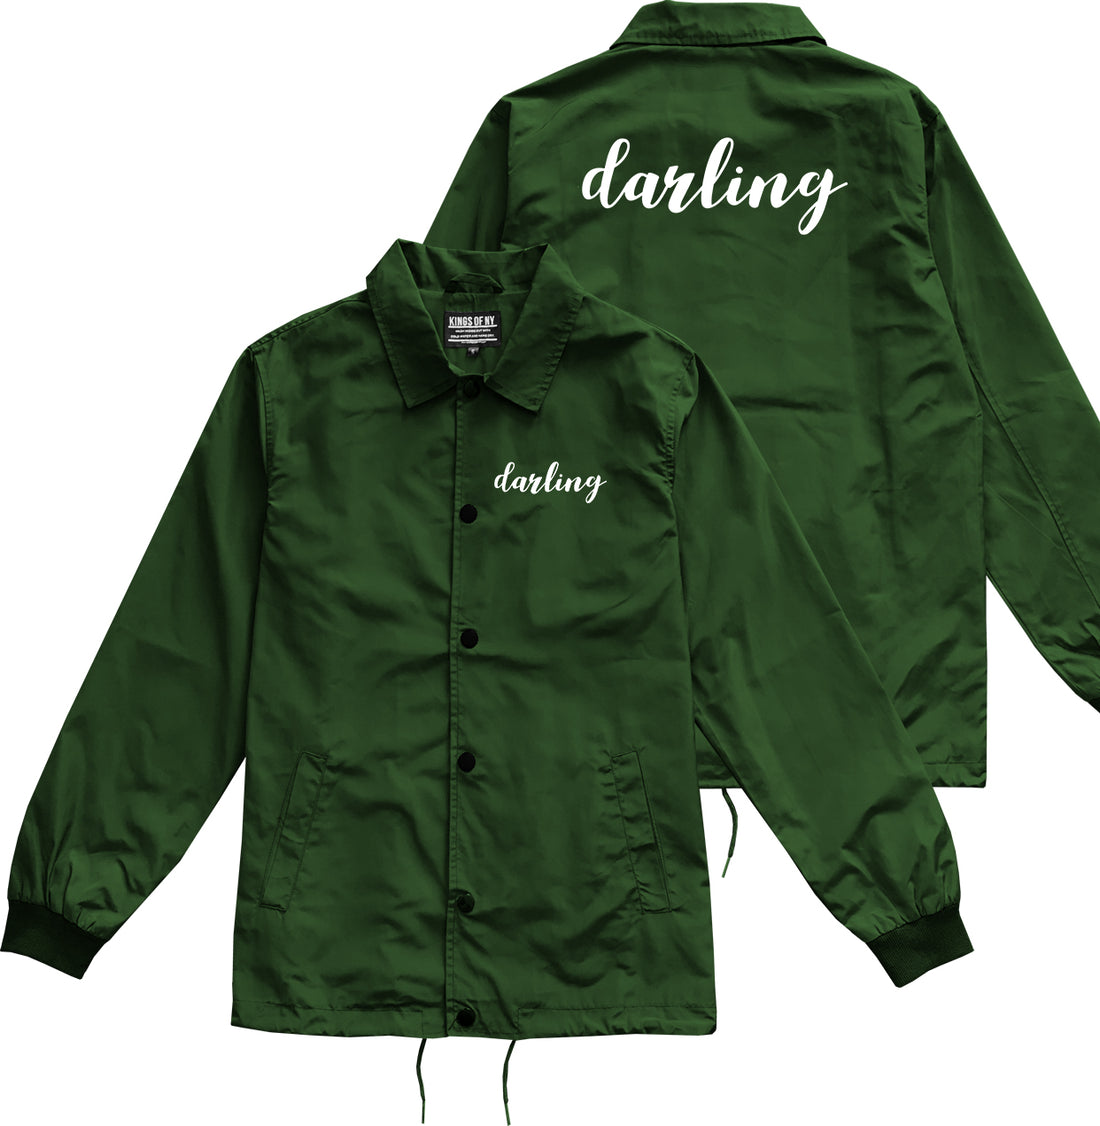 Darling Script Green Coaches Jacket by Kings Of NY